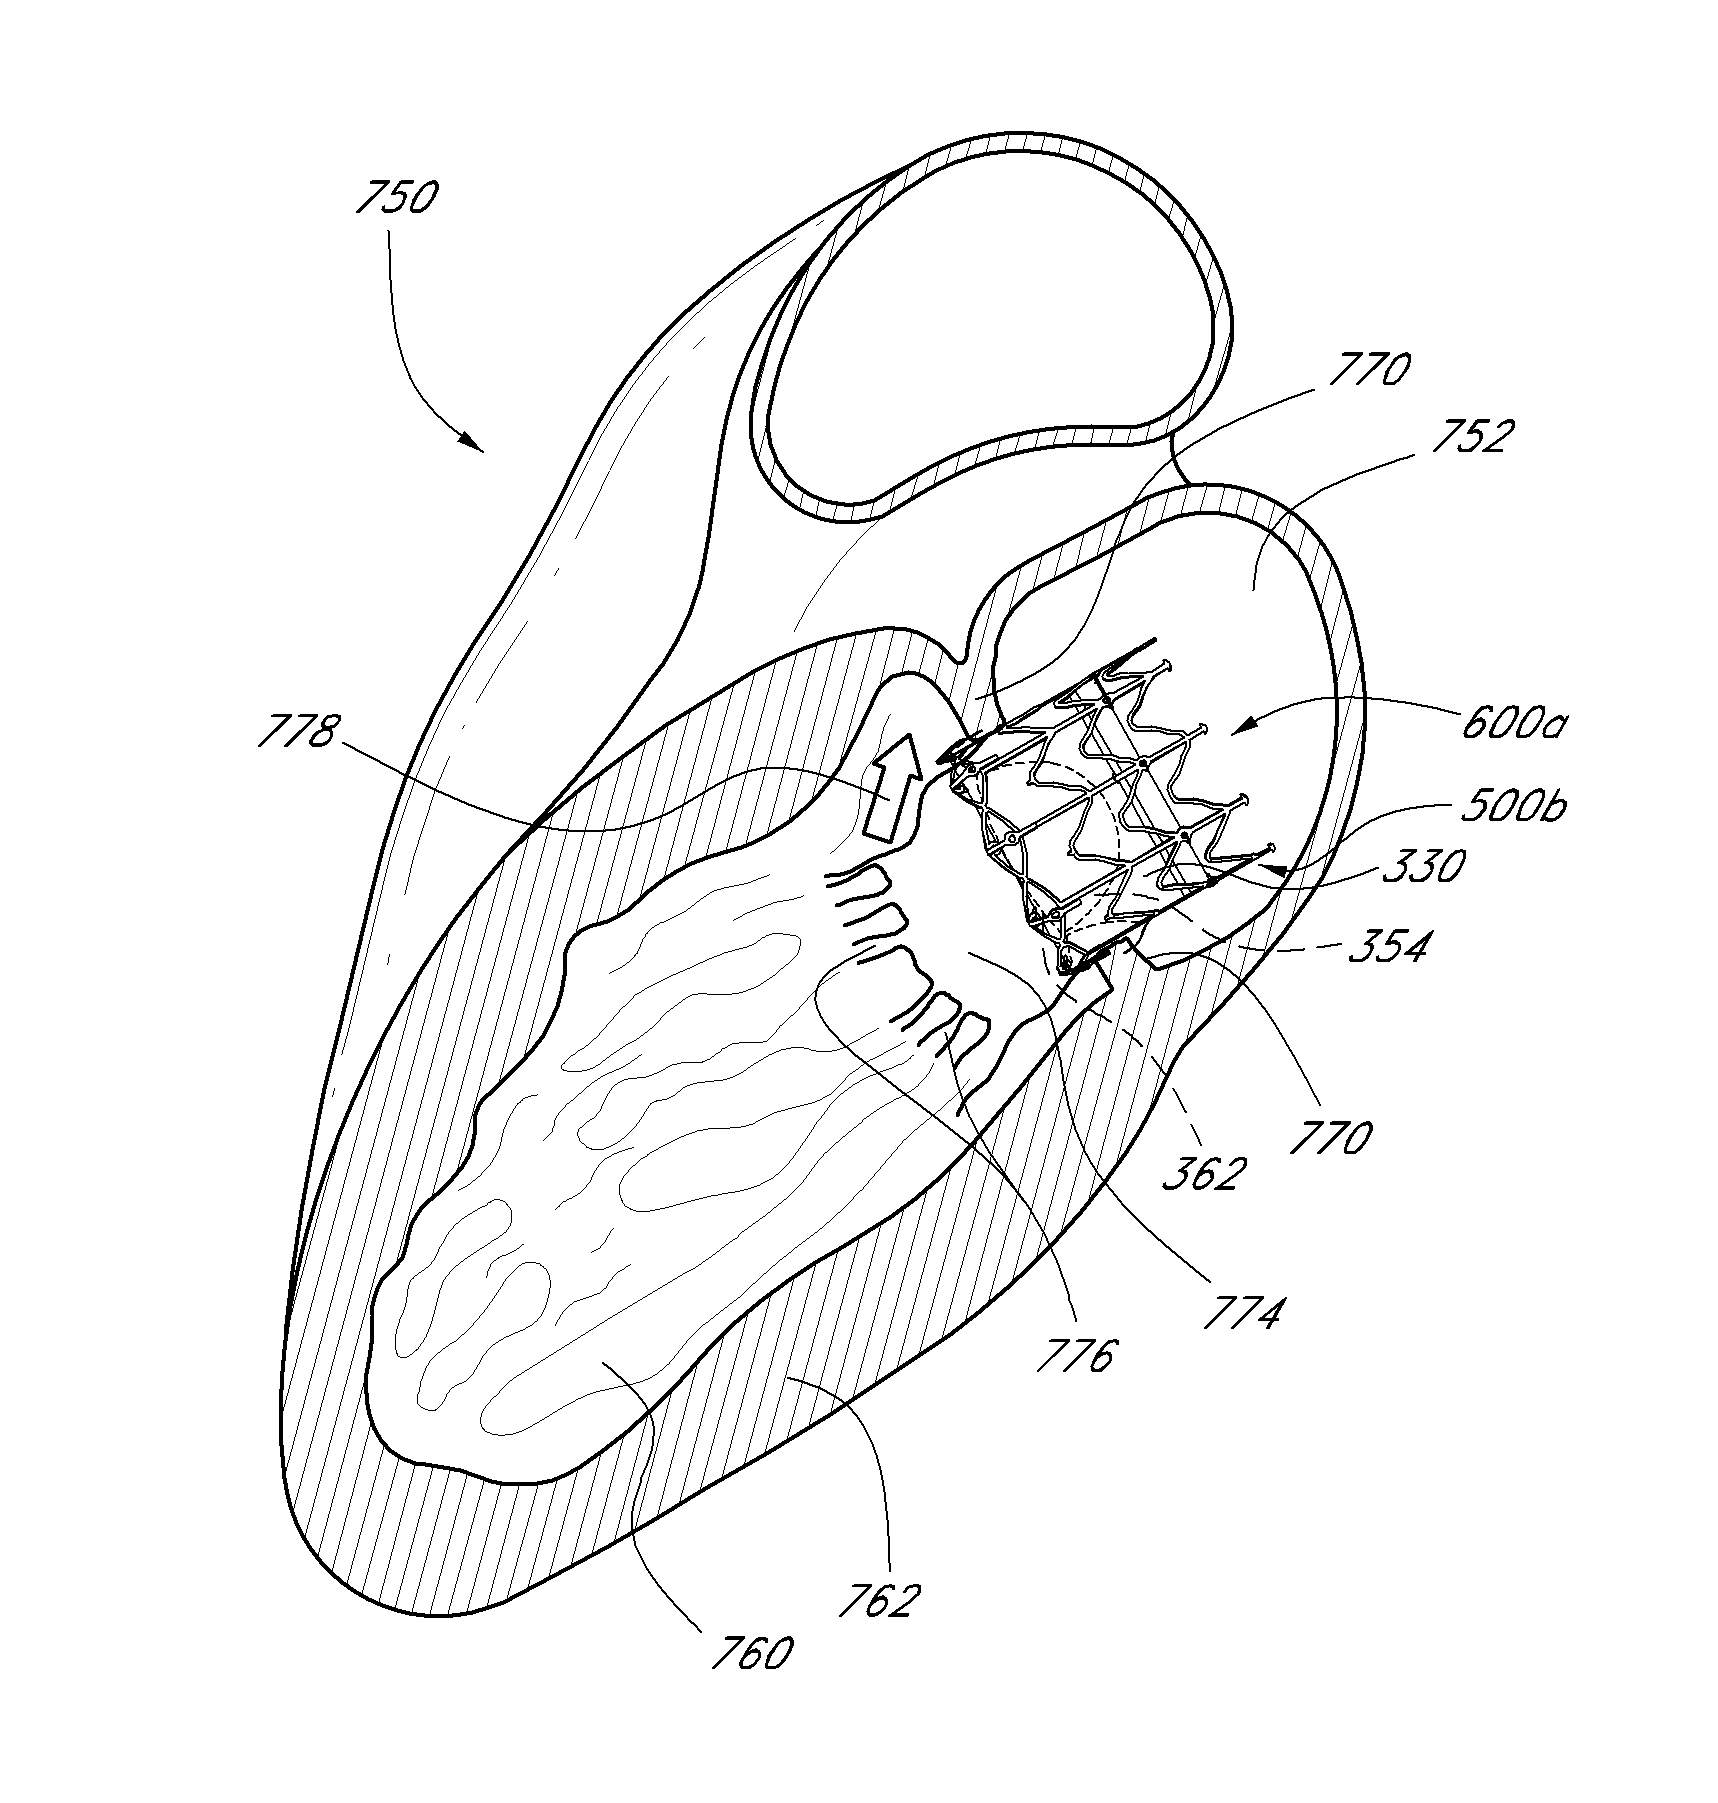 Replacement heart valve and method